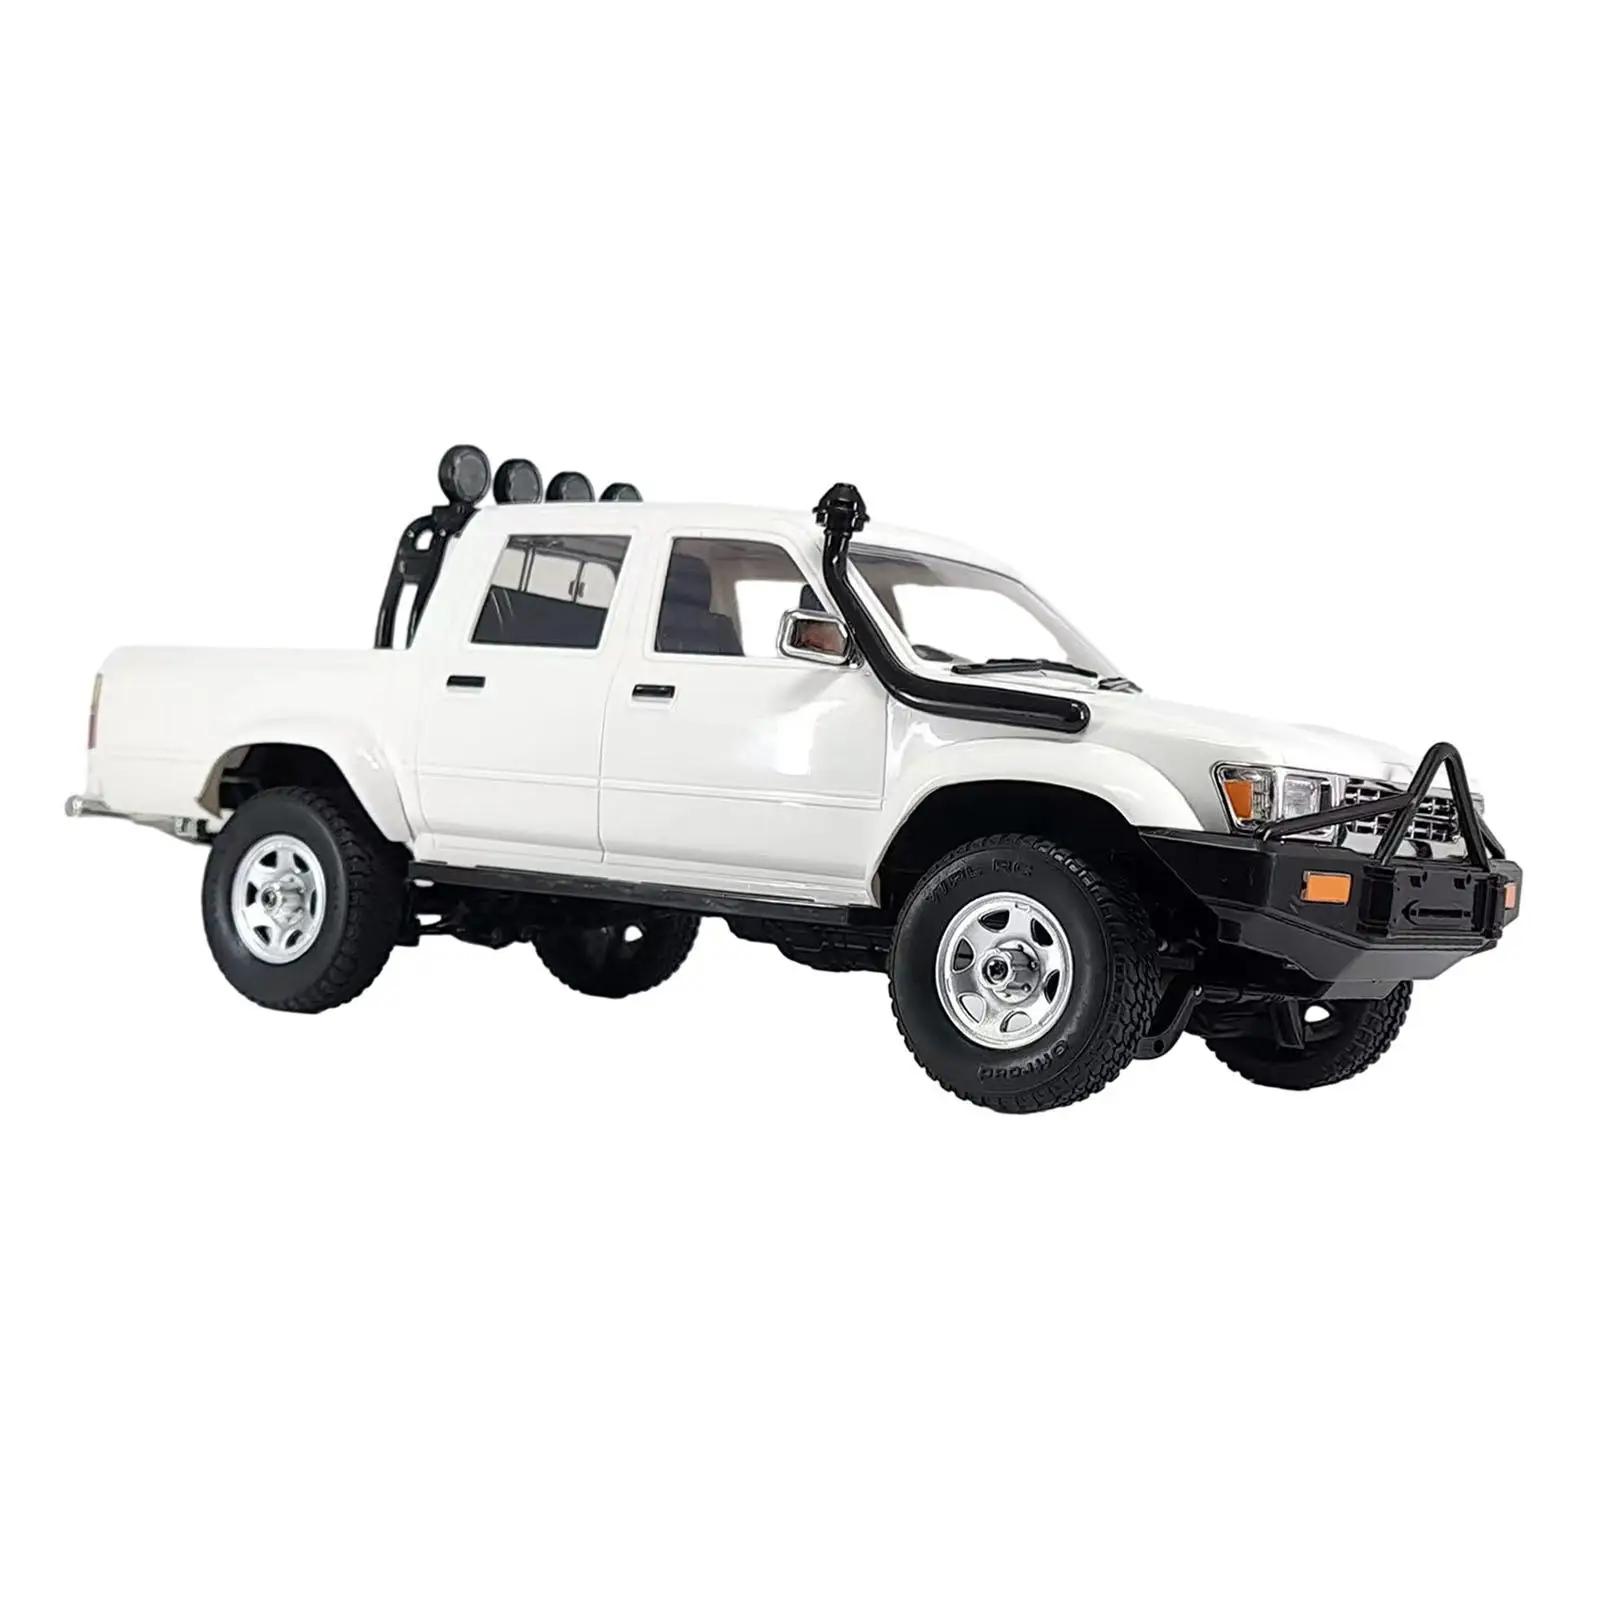 D62-1 RC ڵ , 4WD RC 峭 ..